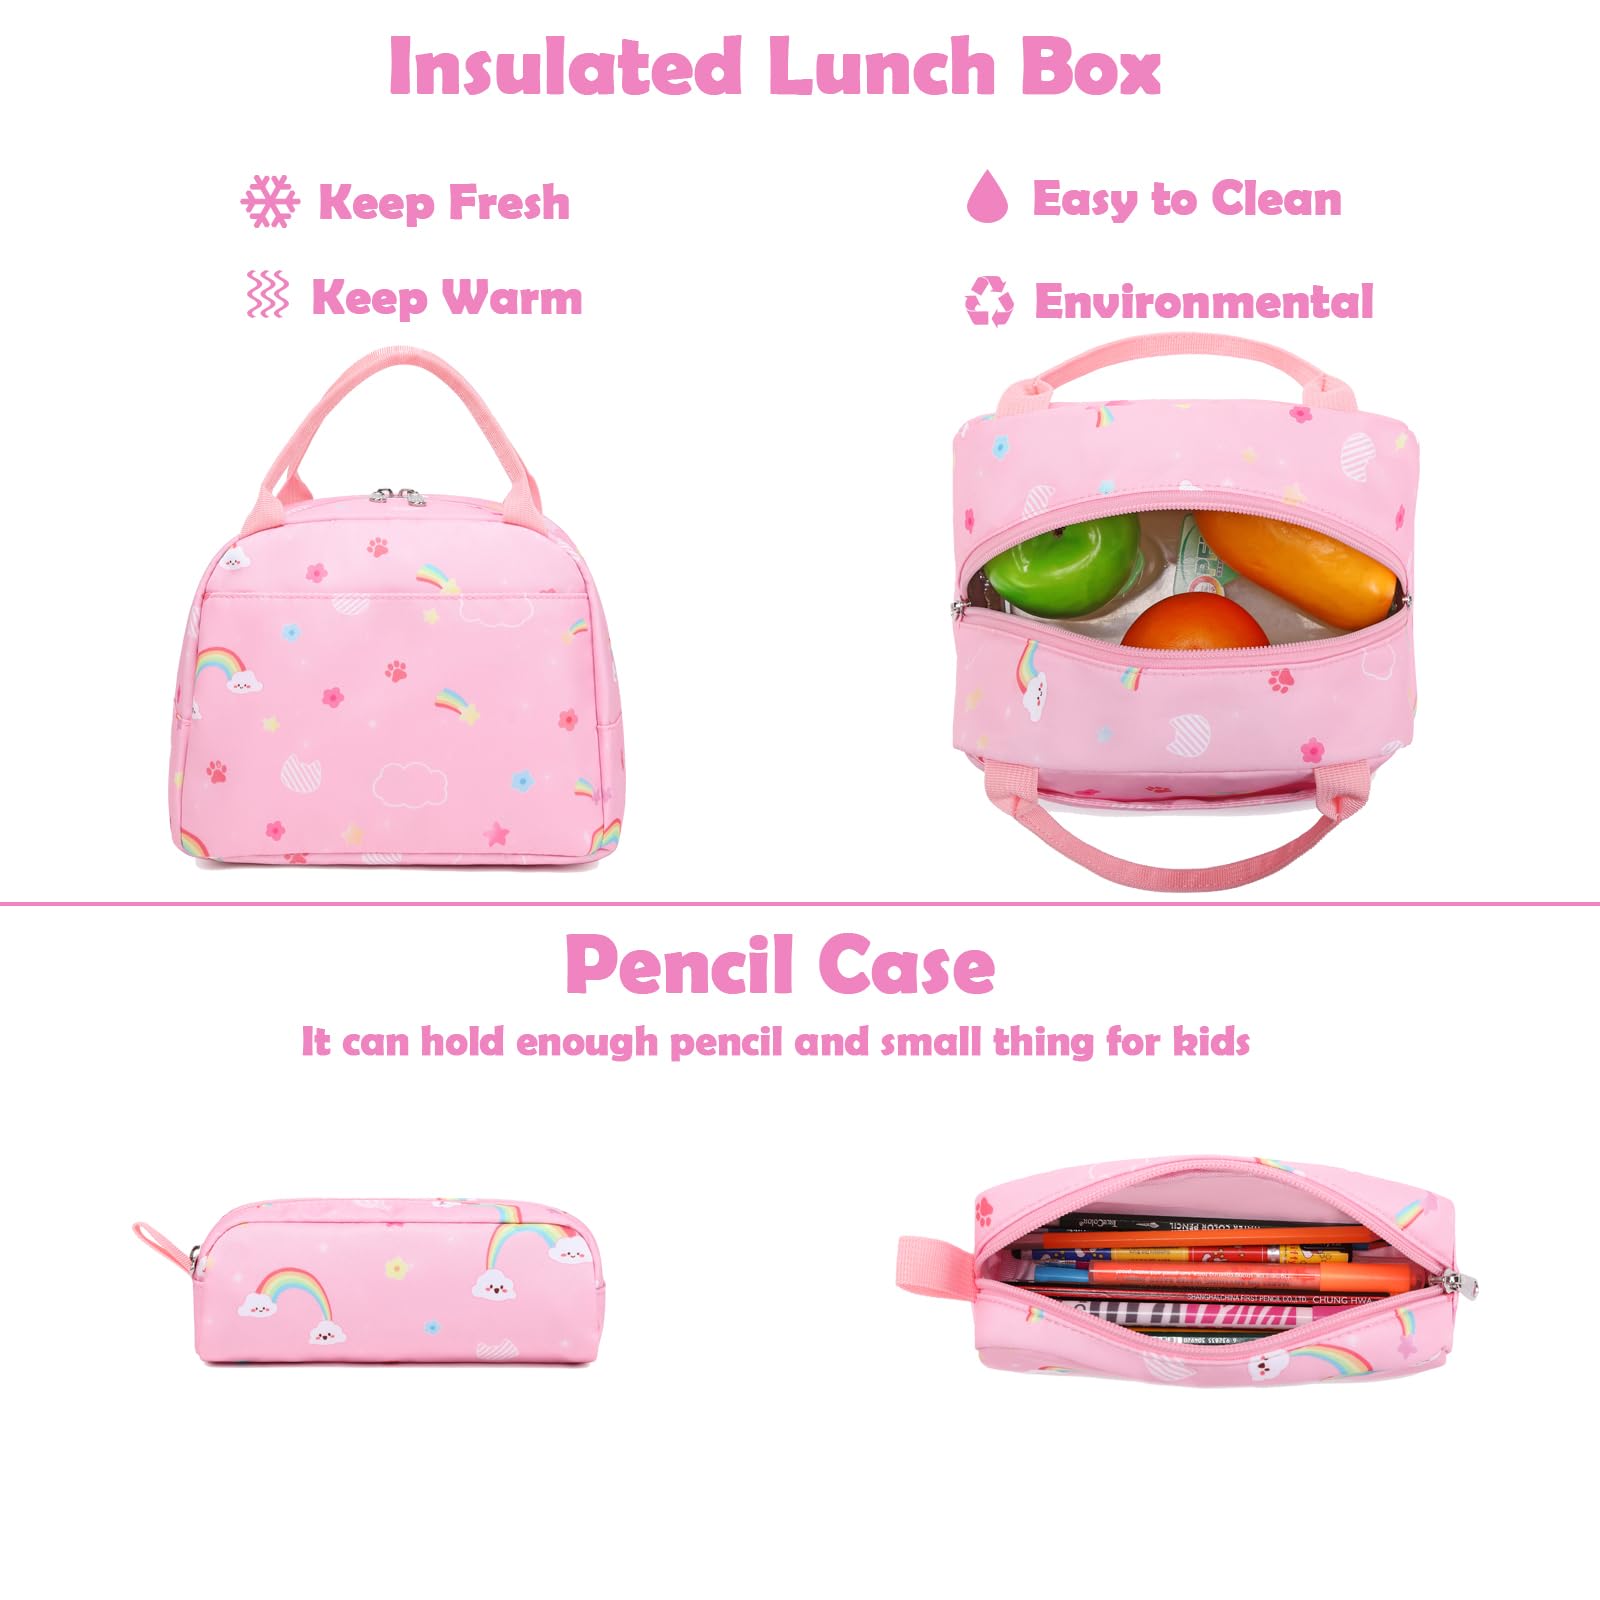 Girls Backpack with Lunch Bag Set, 3PCS Pink Unicorn Cat School Backpack with Pencil Case Large Capacity School Bookbags with Chest Strap for Preschool Kindergarten Elementary Girls